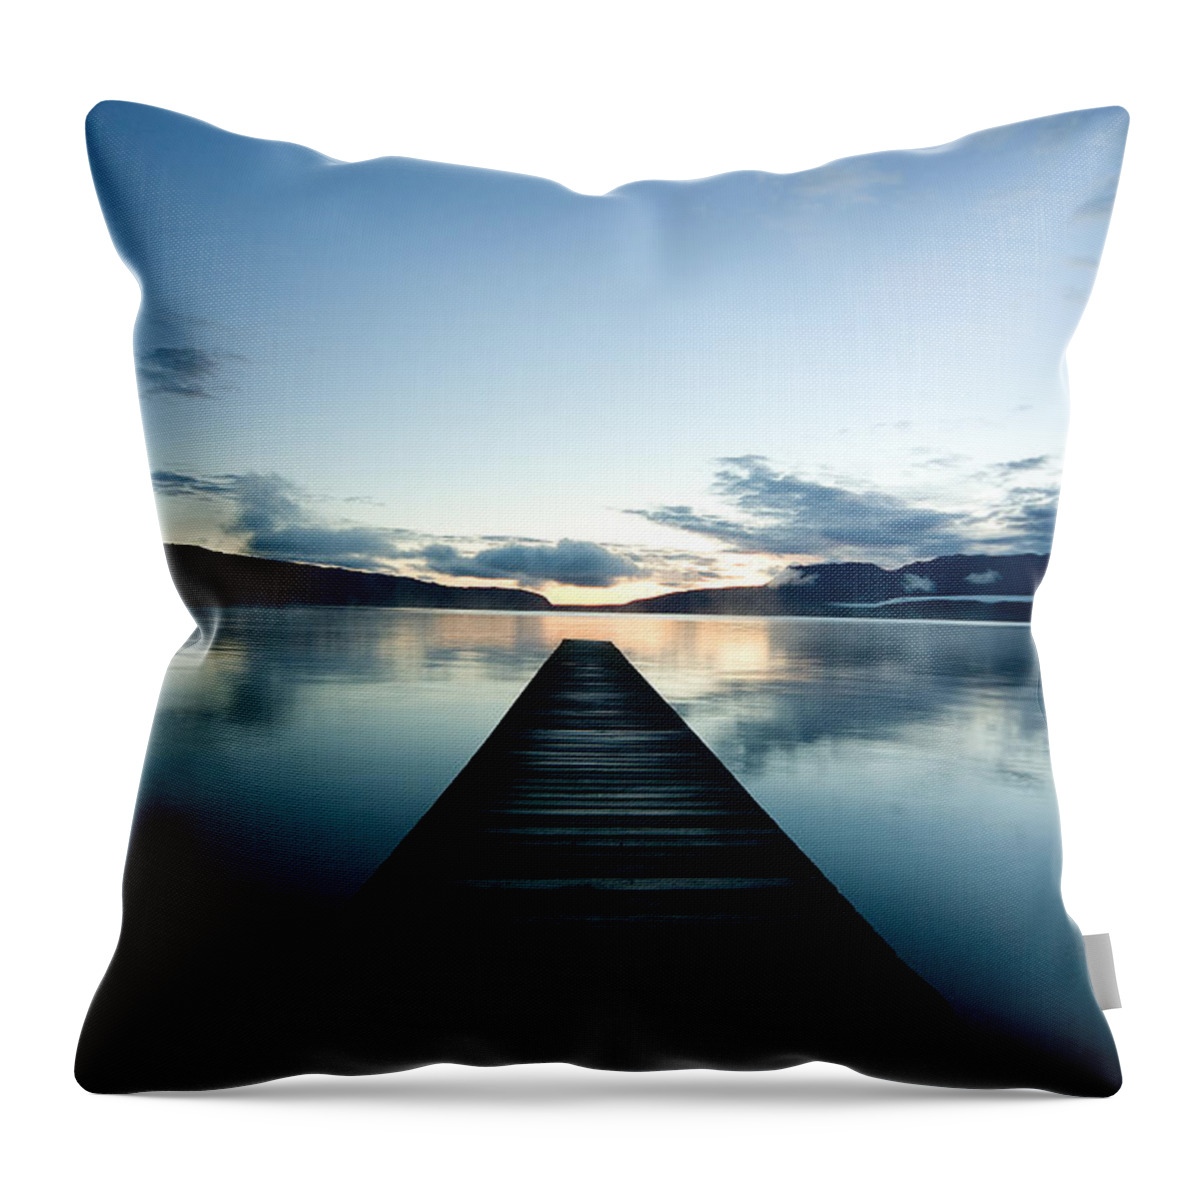 Tranquility Throw Pillow featuring the photograph Jetty On Lake Tarawera At Sunrise by Wowstockfootage